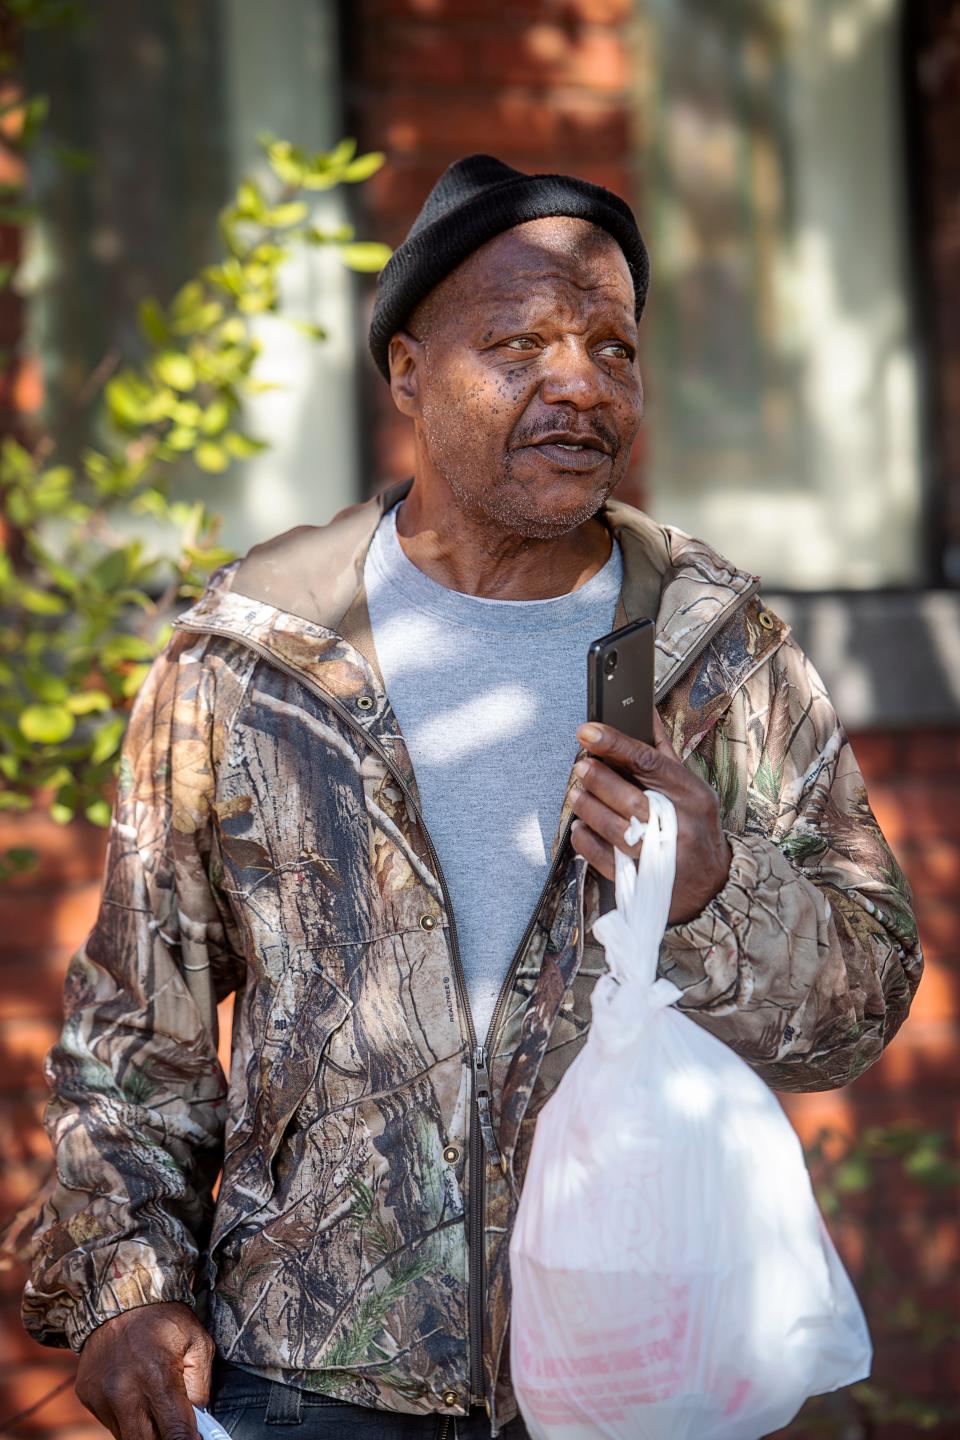 Solo, 65, first came to Haywood Street in 2014. “I’ve stayed out here on the streets, and I’ve seen what these people go through," Solo said. At 65-years-old, he thought he'd be dead at 25.